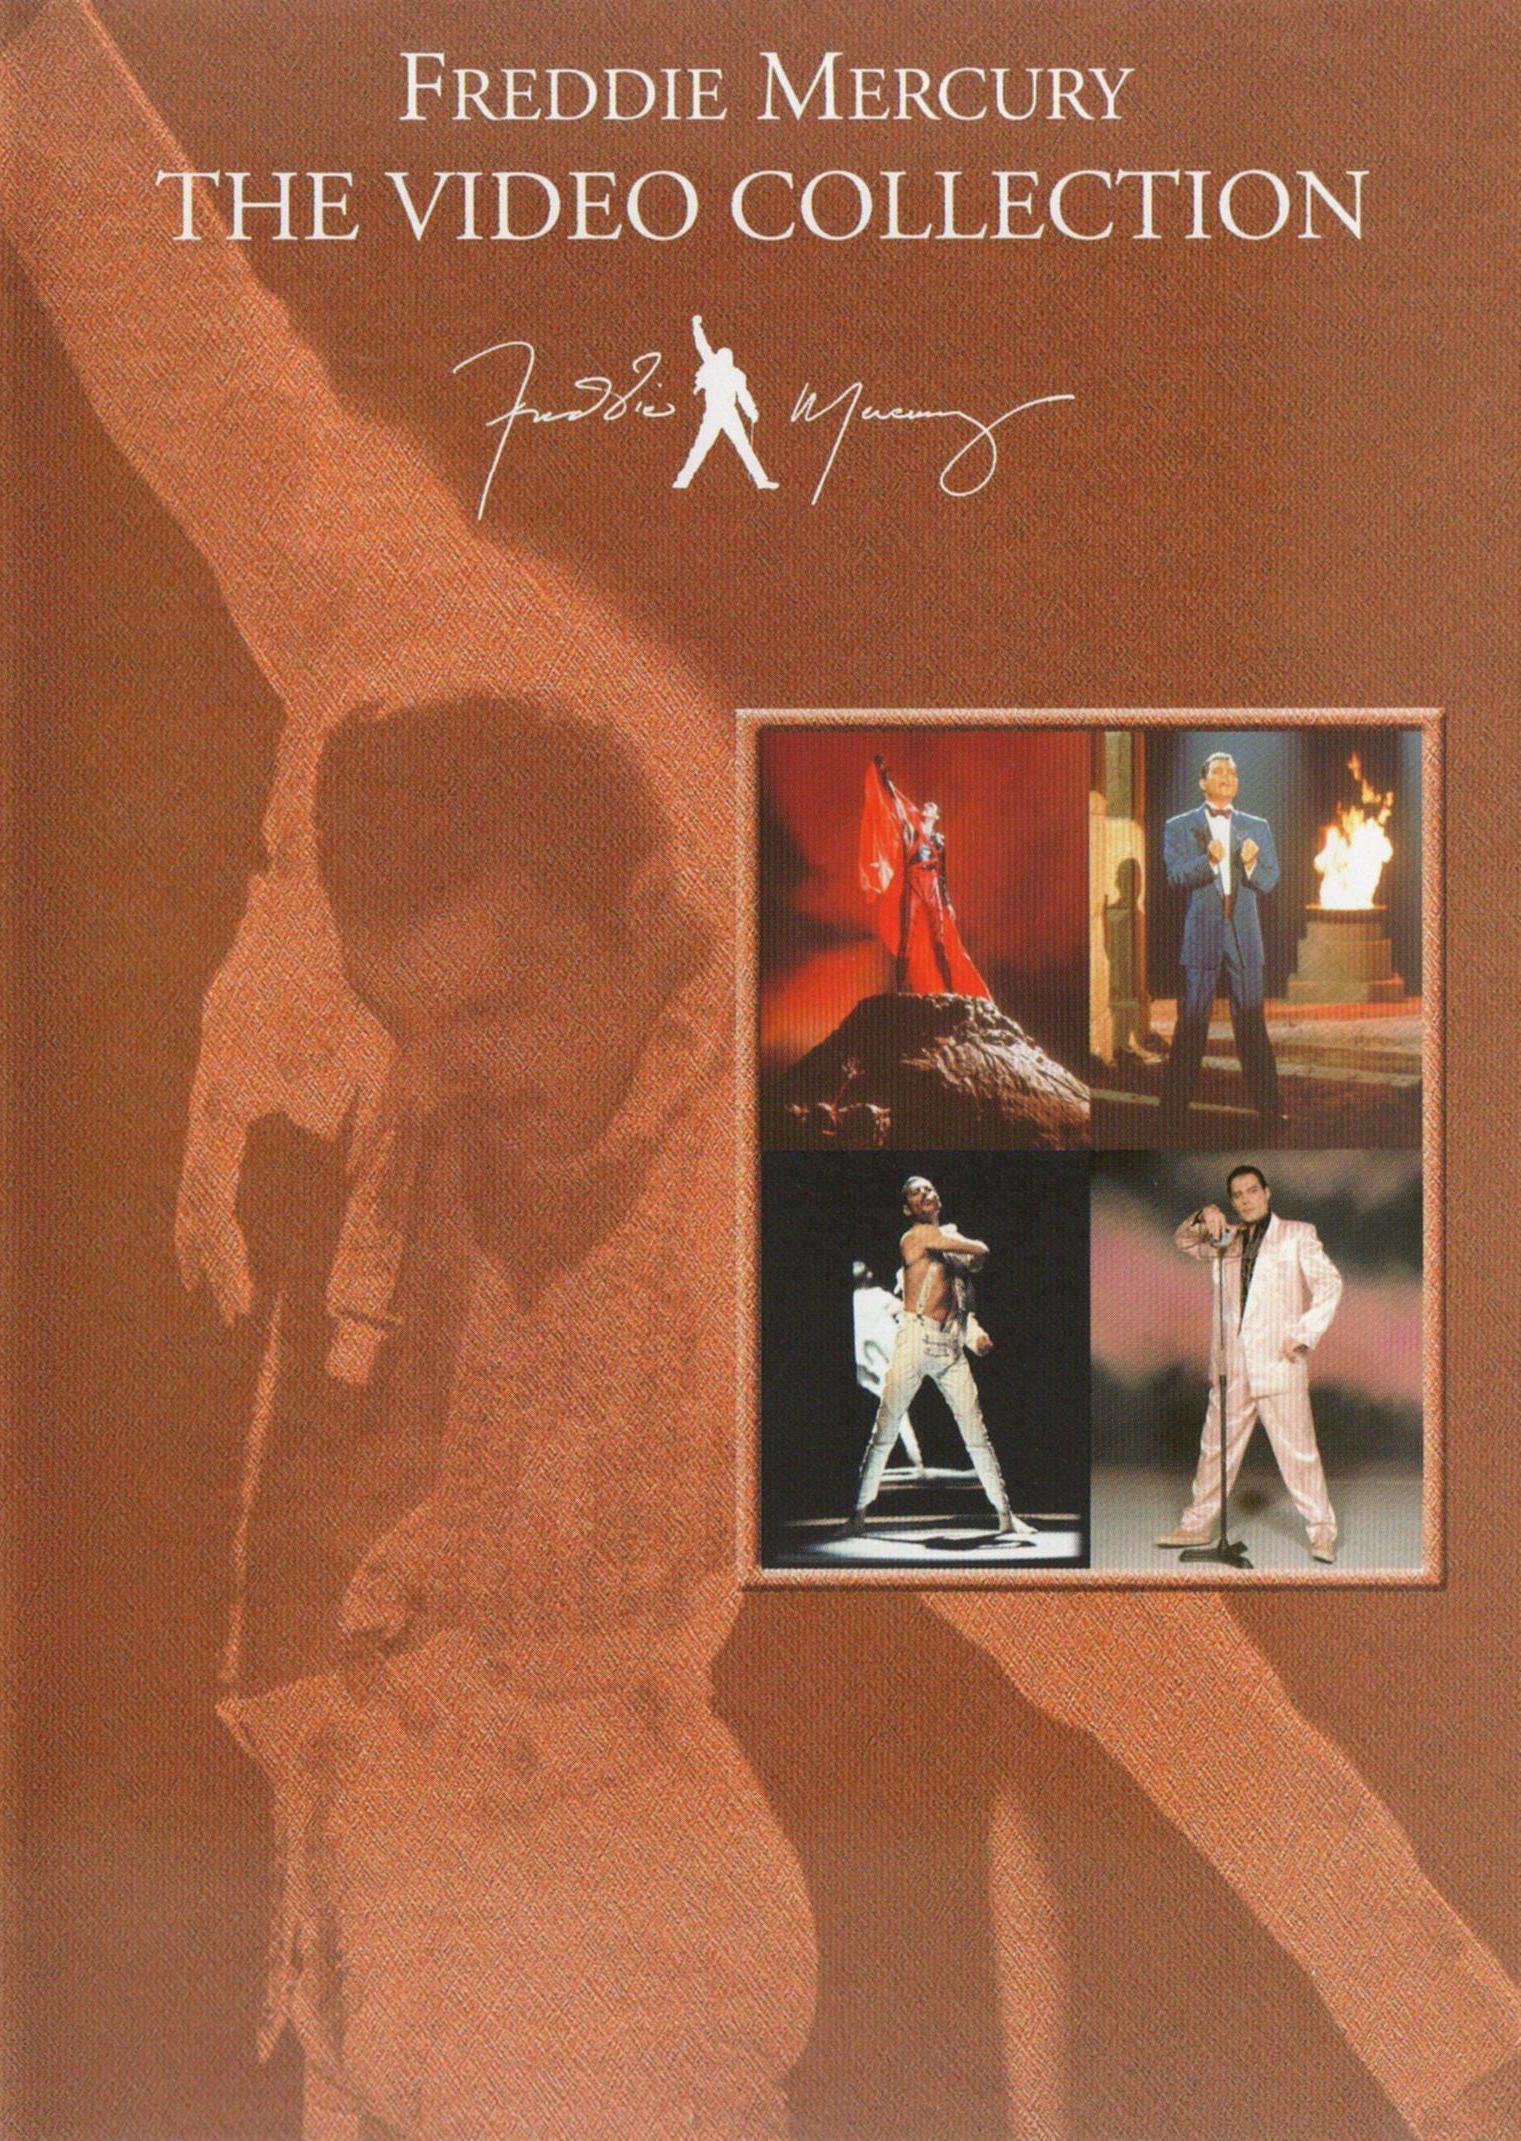 FREDDIE MERCURY - THE VIDEO COLLECTION [UK]